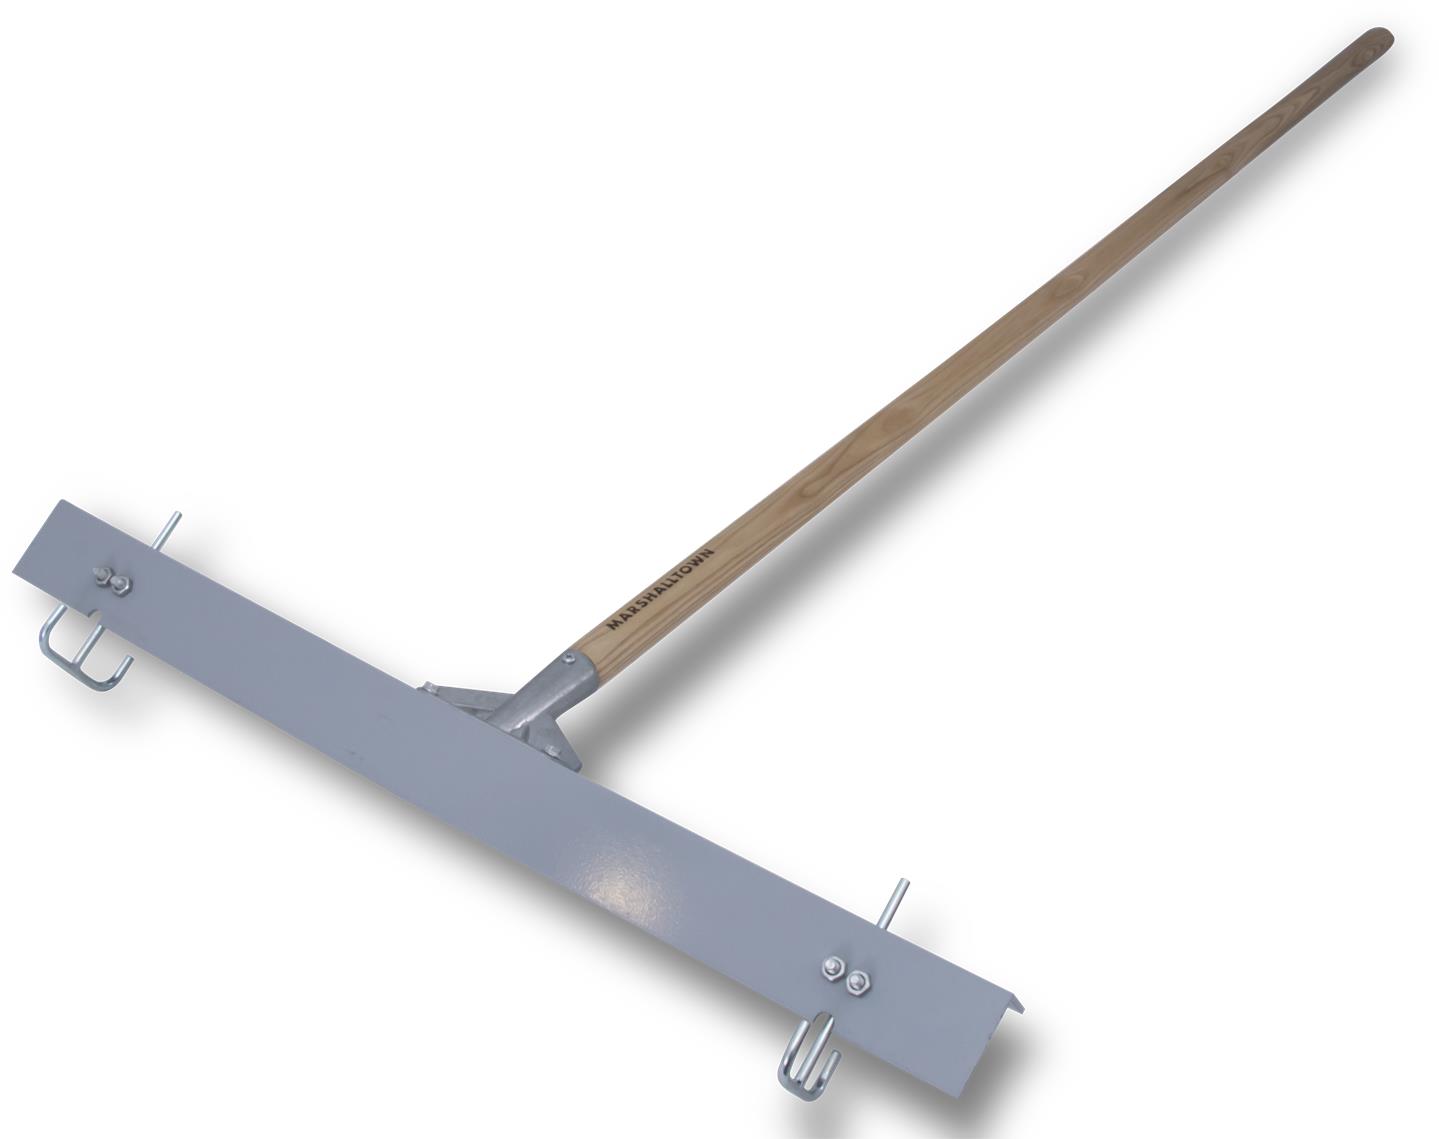 Gauge Rake Aluminum with 24" Head and 60" Tampered Ash Handle